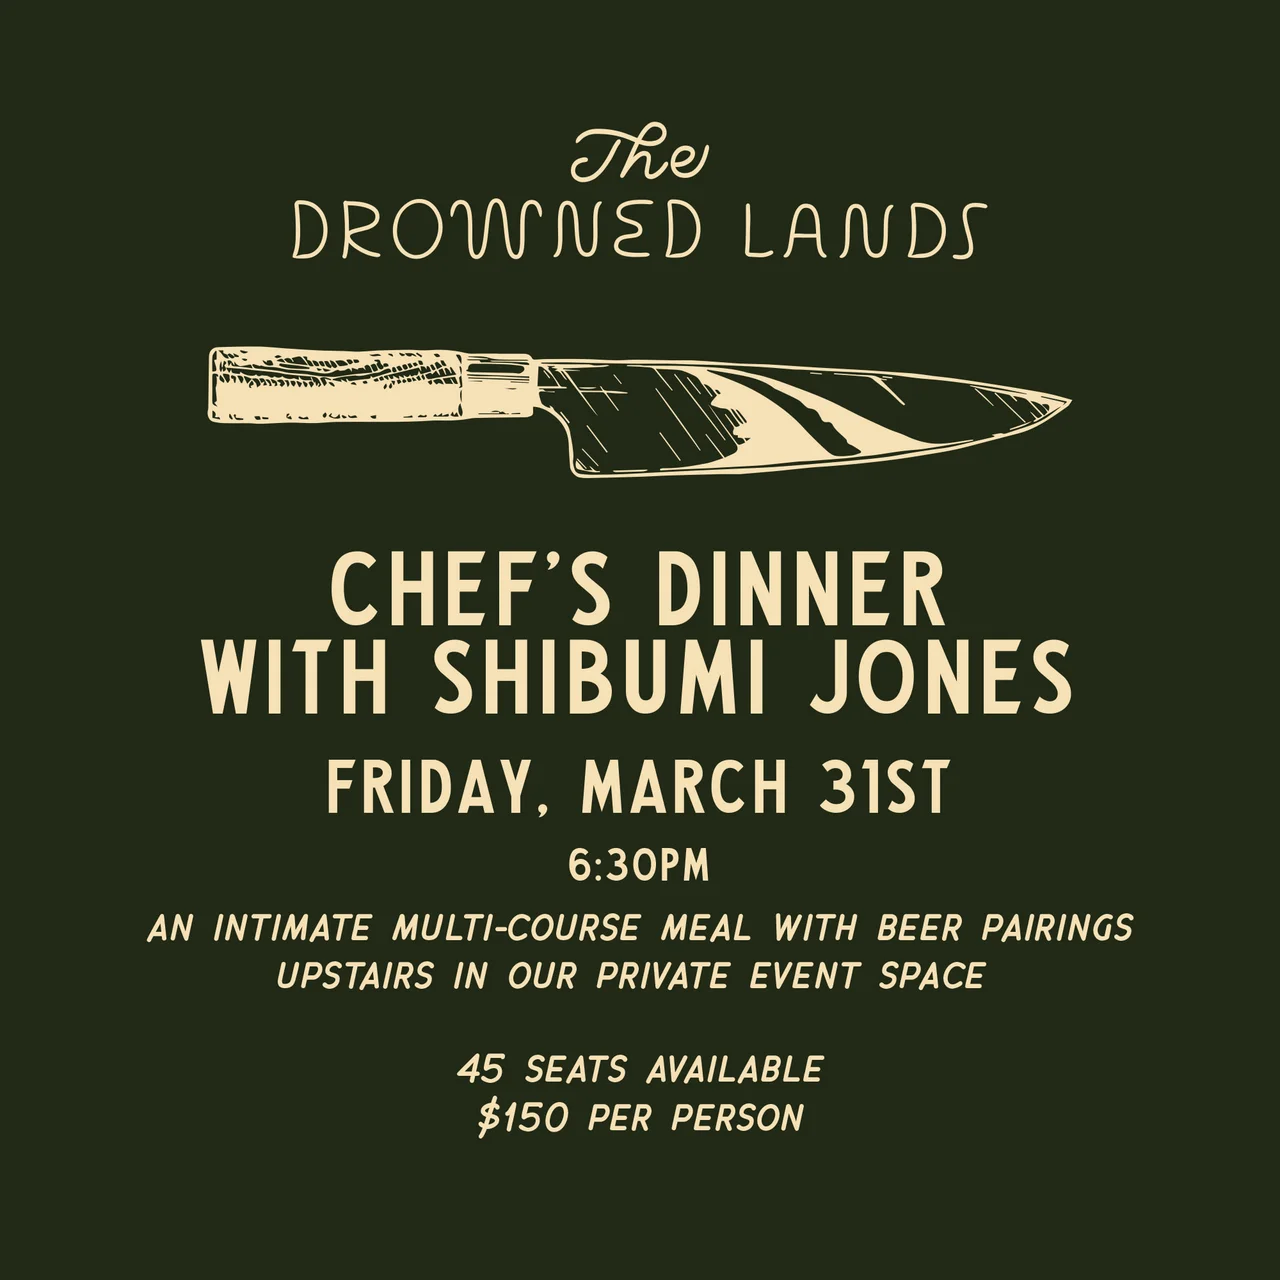 The Drowned Lands Chef's Dinner